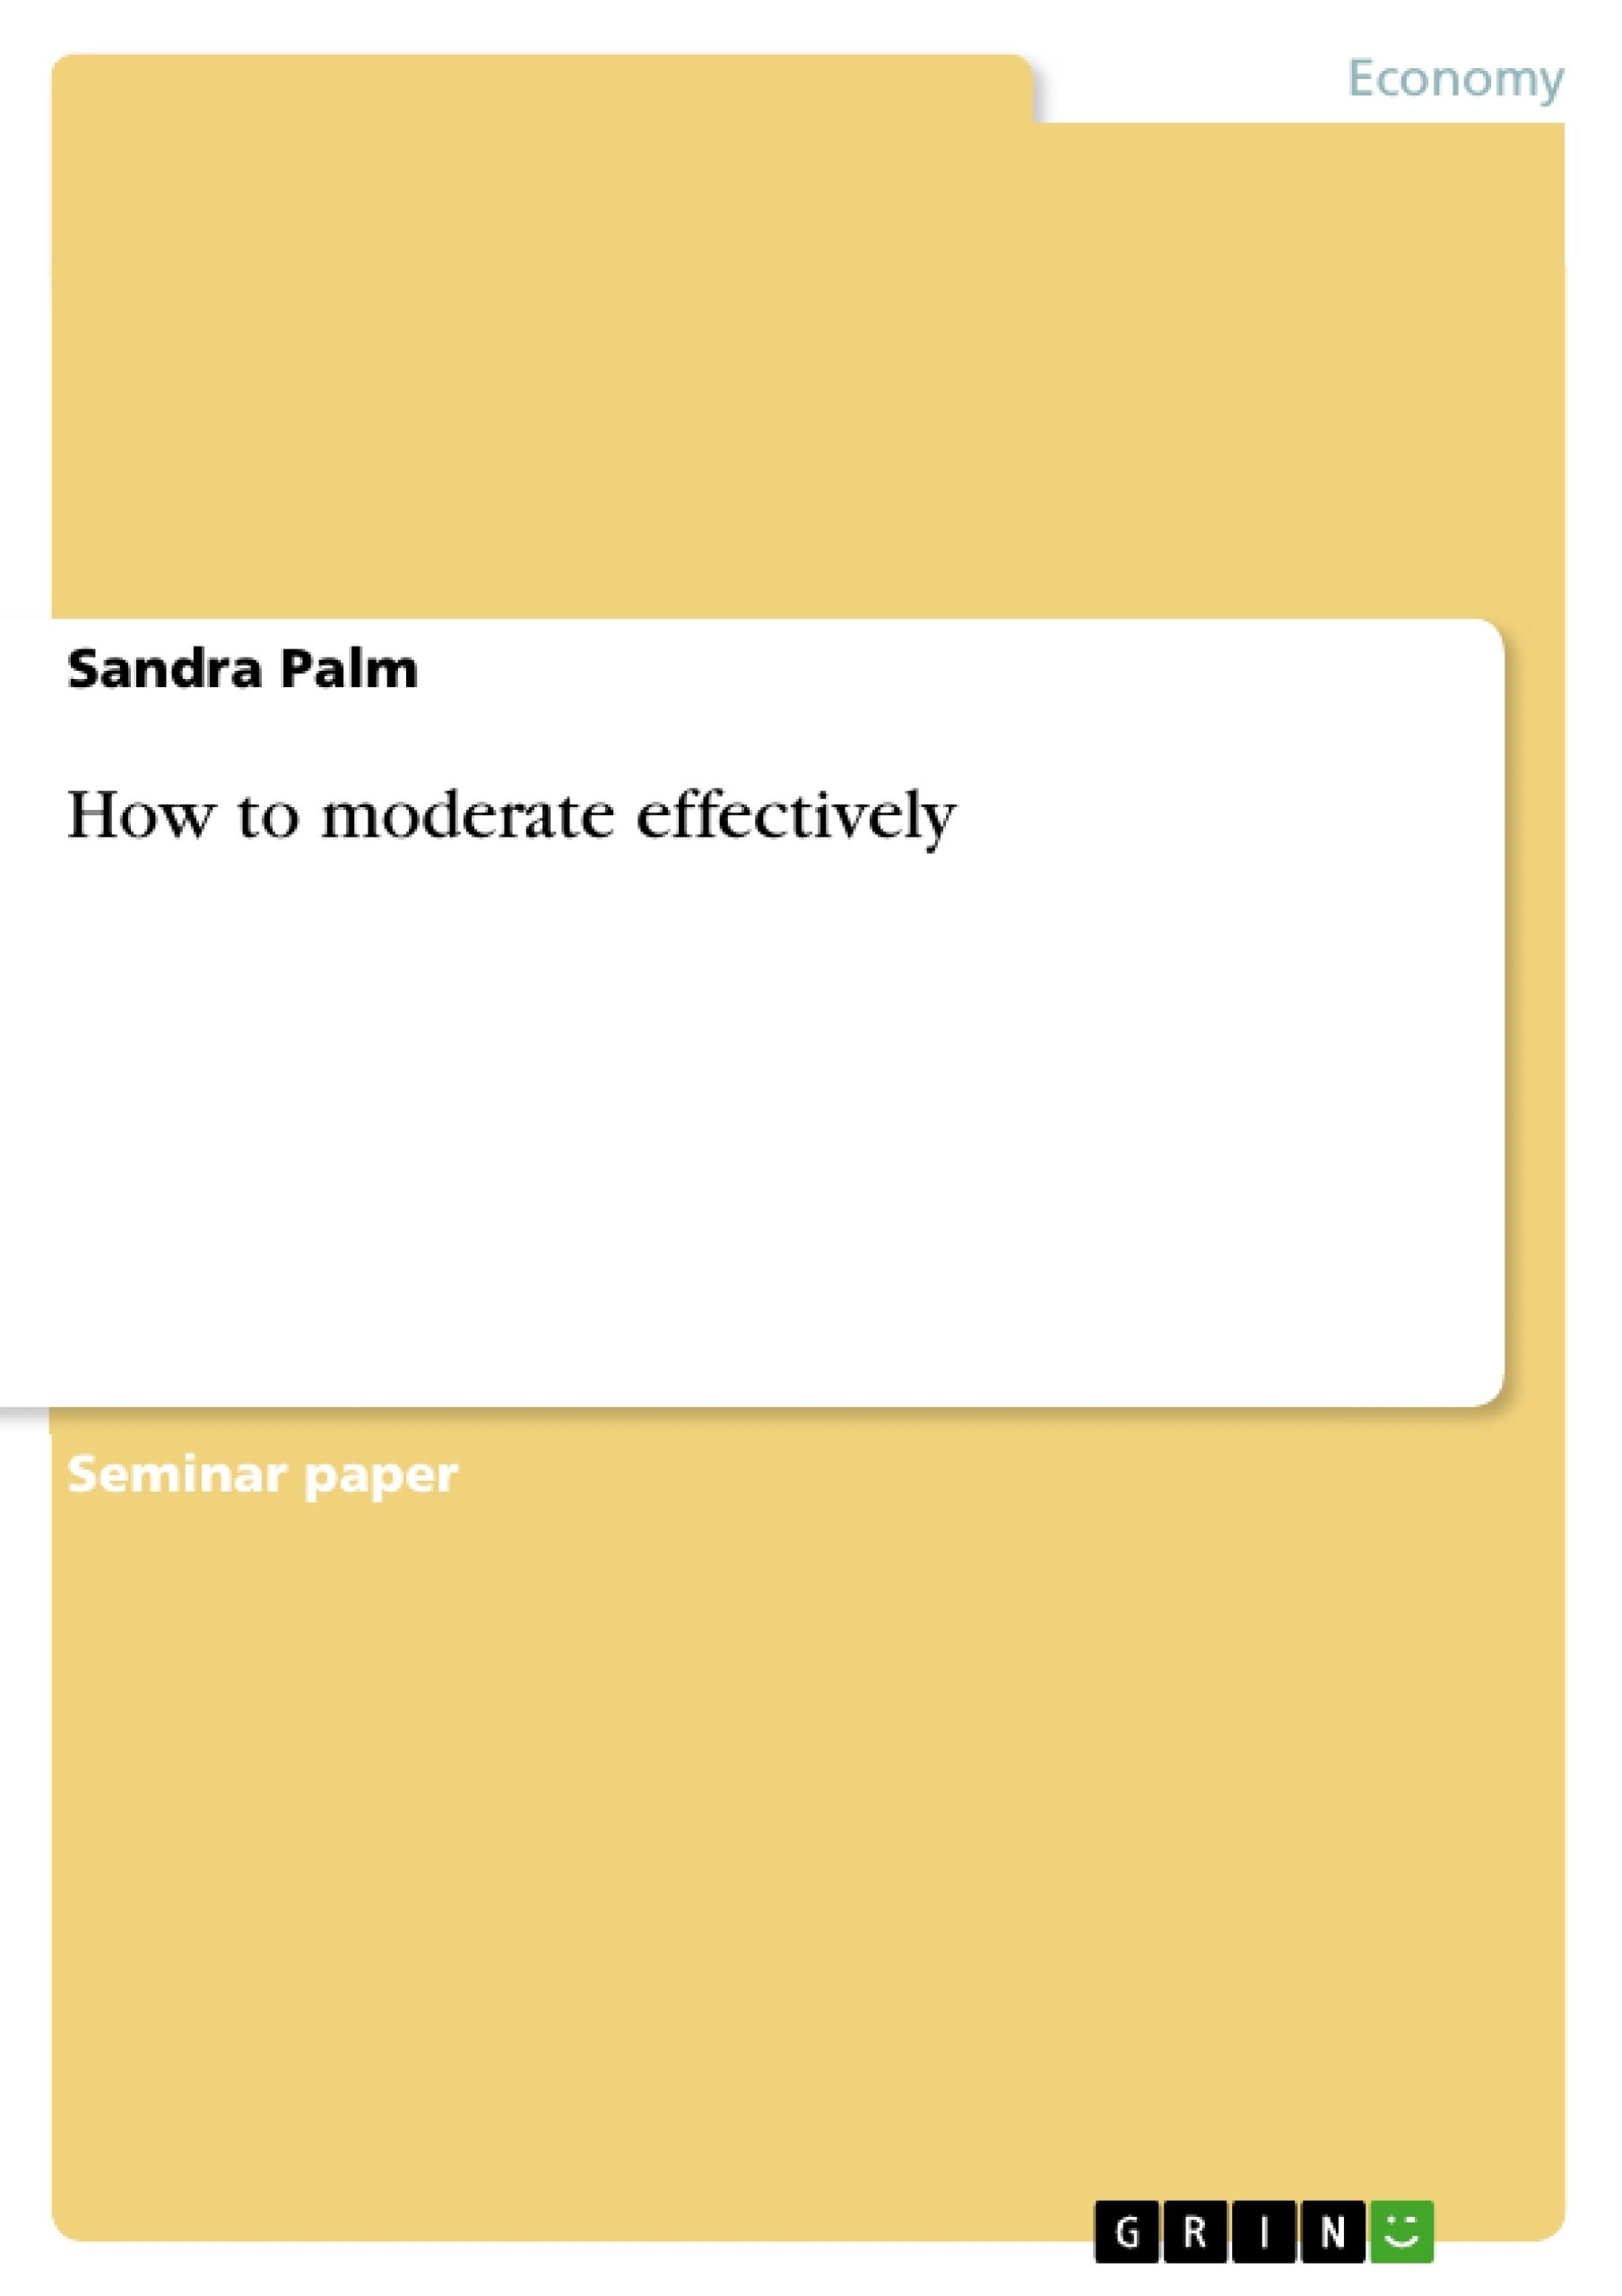 Title: How to moderate effectively